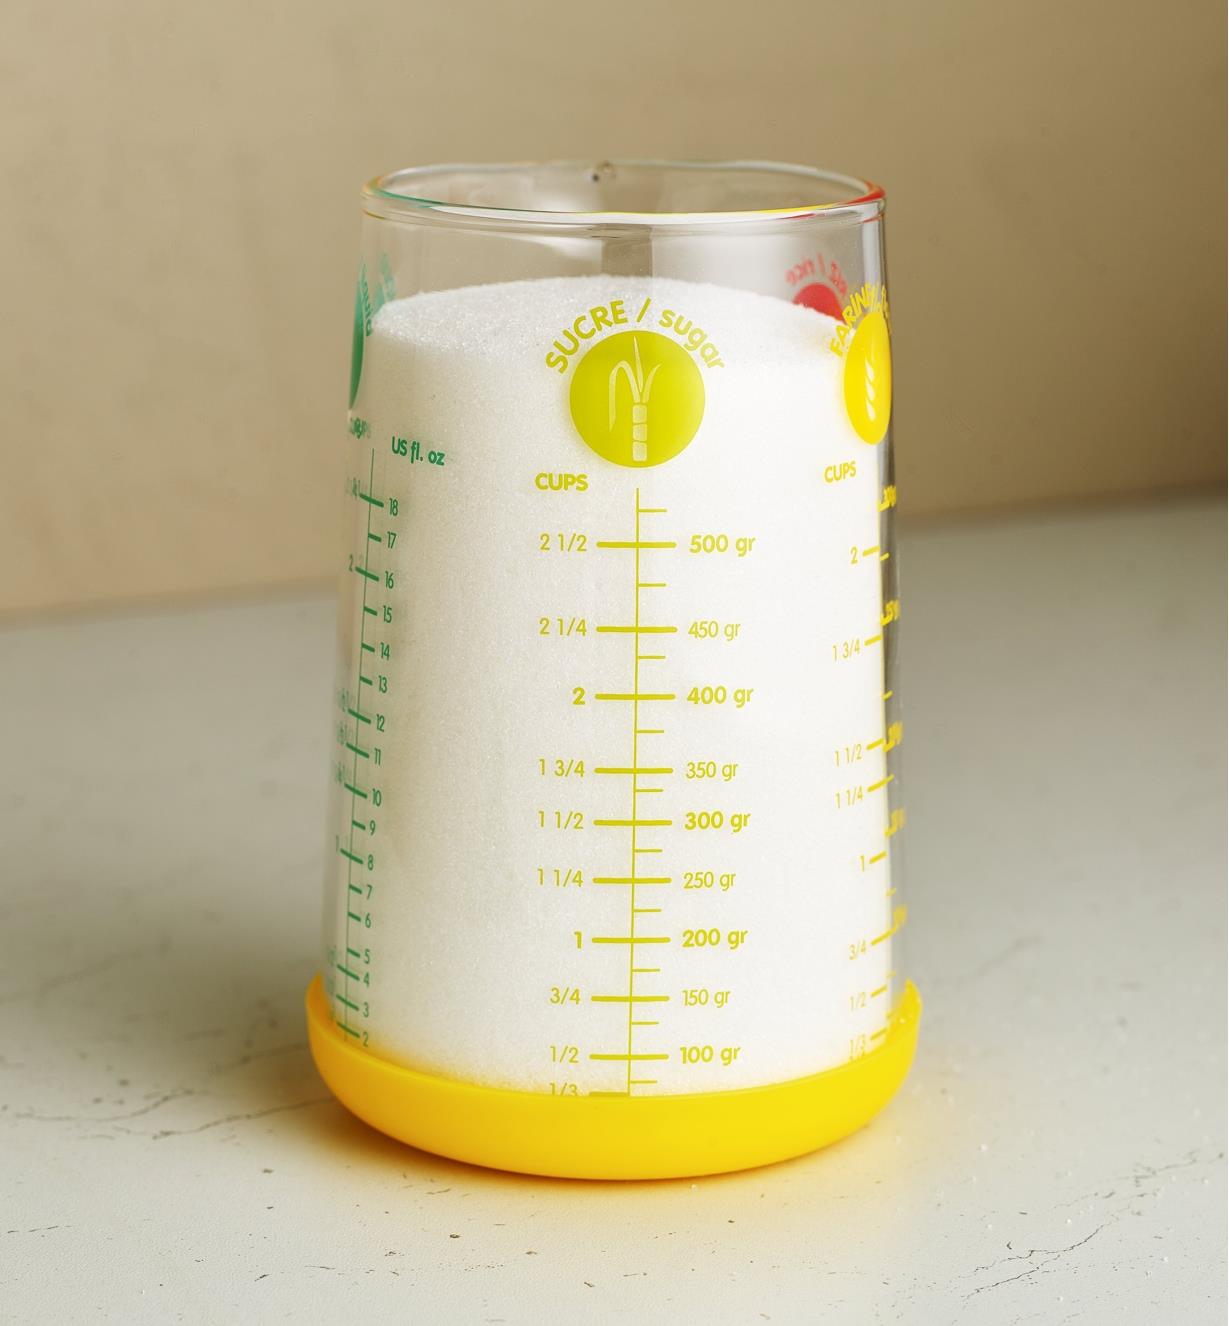 A measuring glass filled with sugar